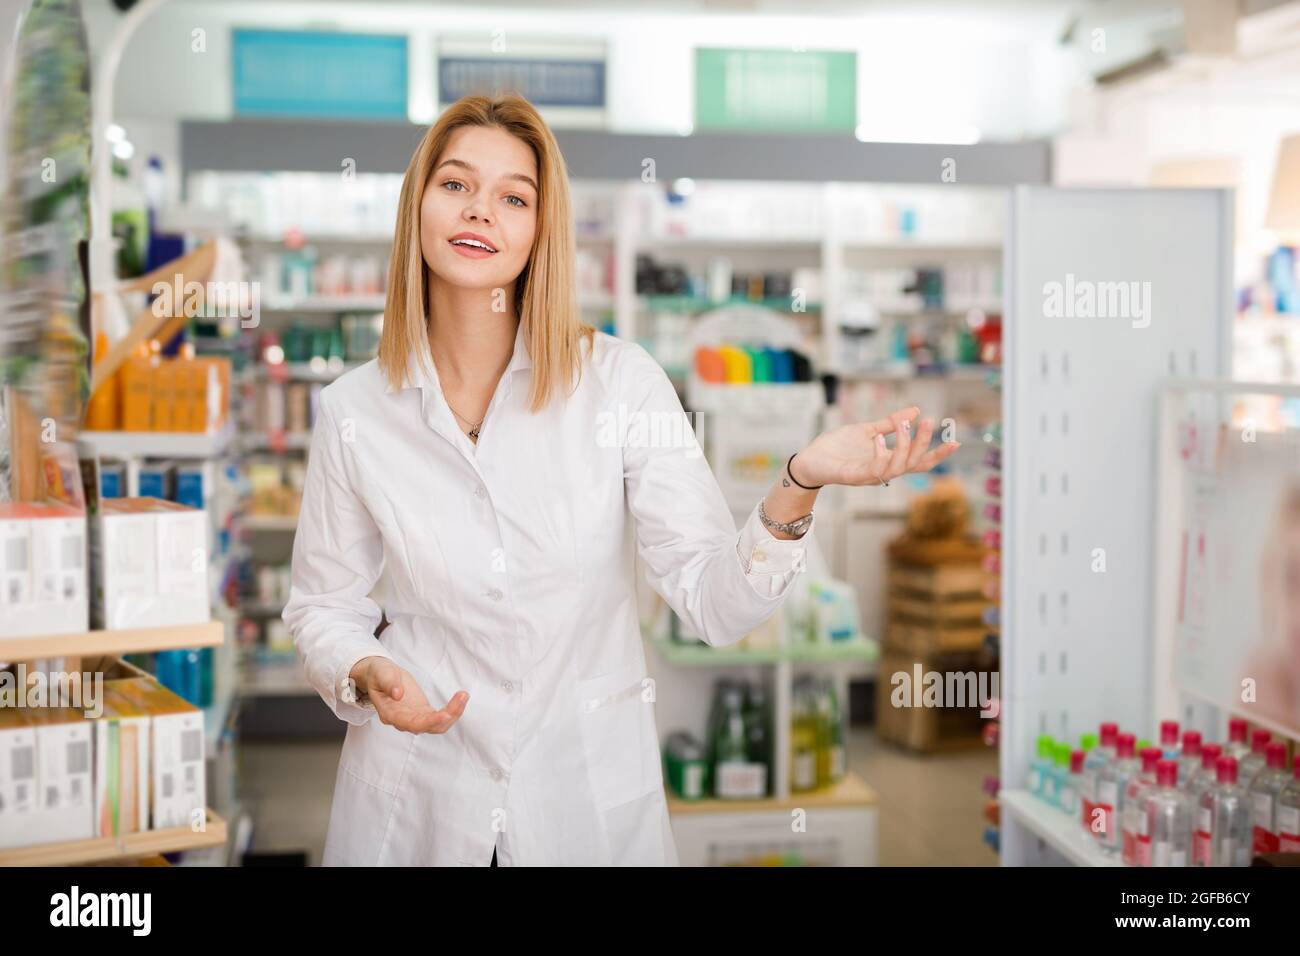 Ordinary woman pharmacist showing assortment of drugs in pharmacy Stock Photo